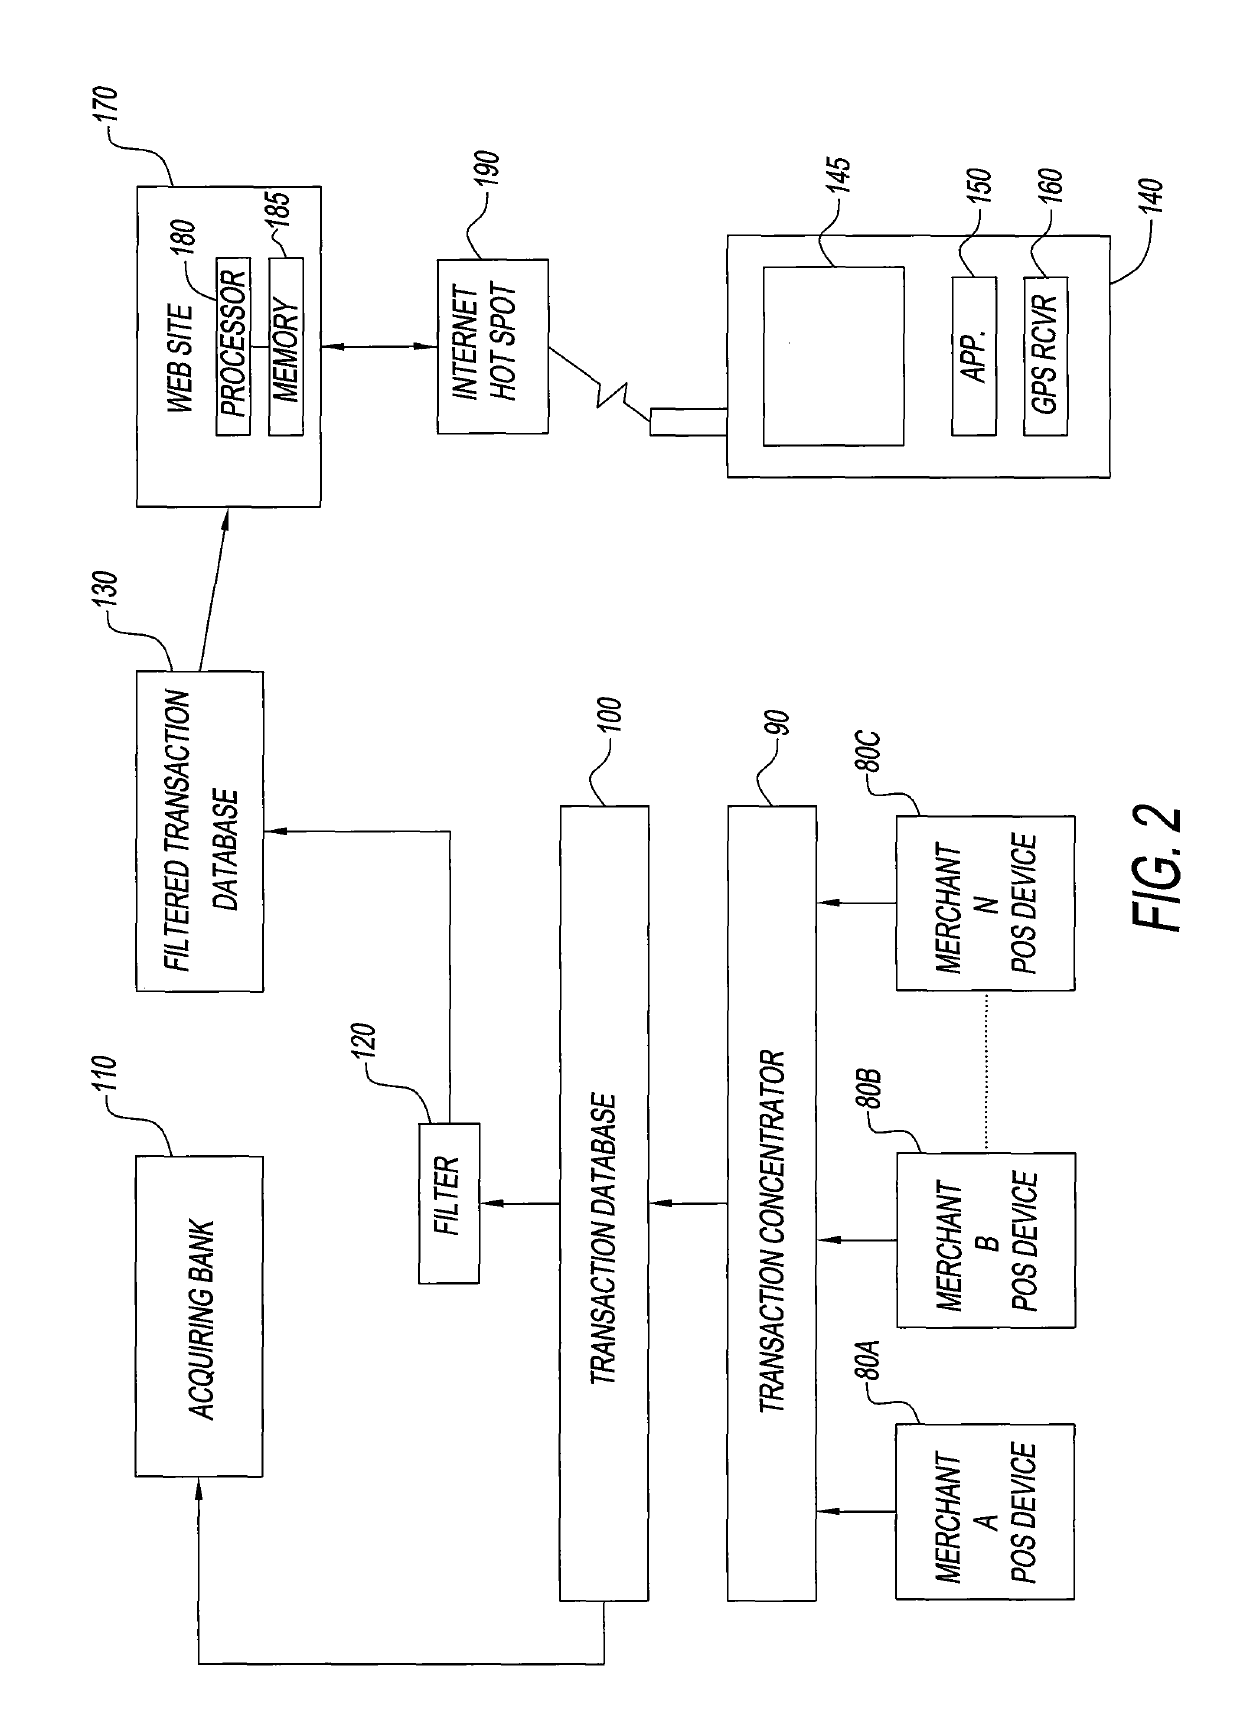 System and method for setting a hot product alert on transaction data